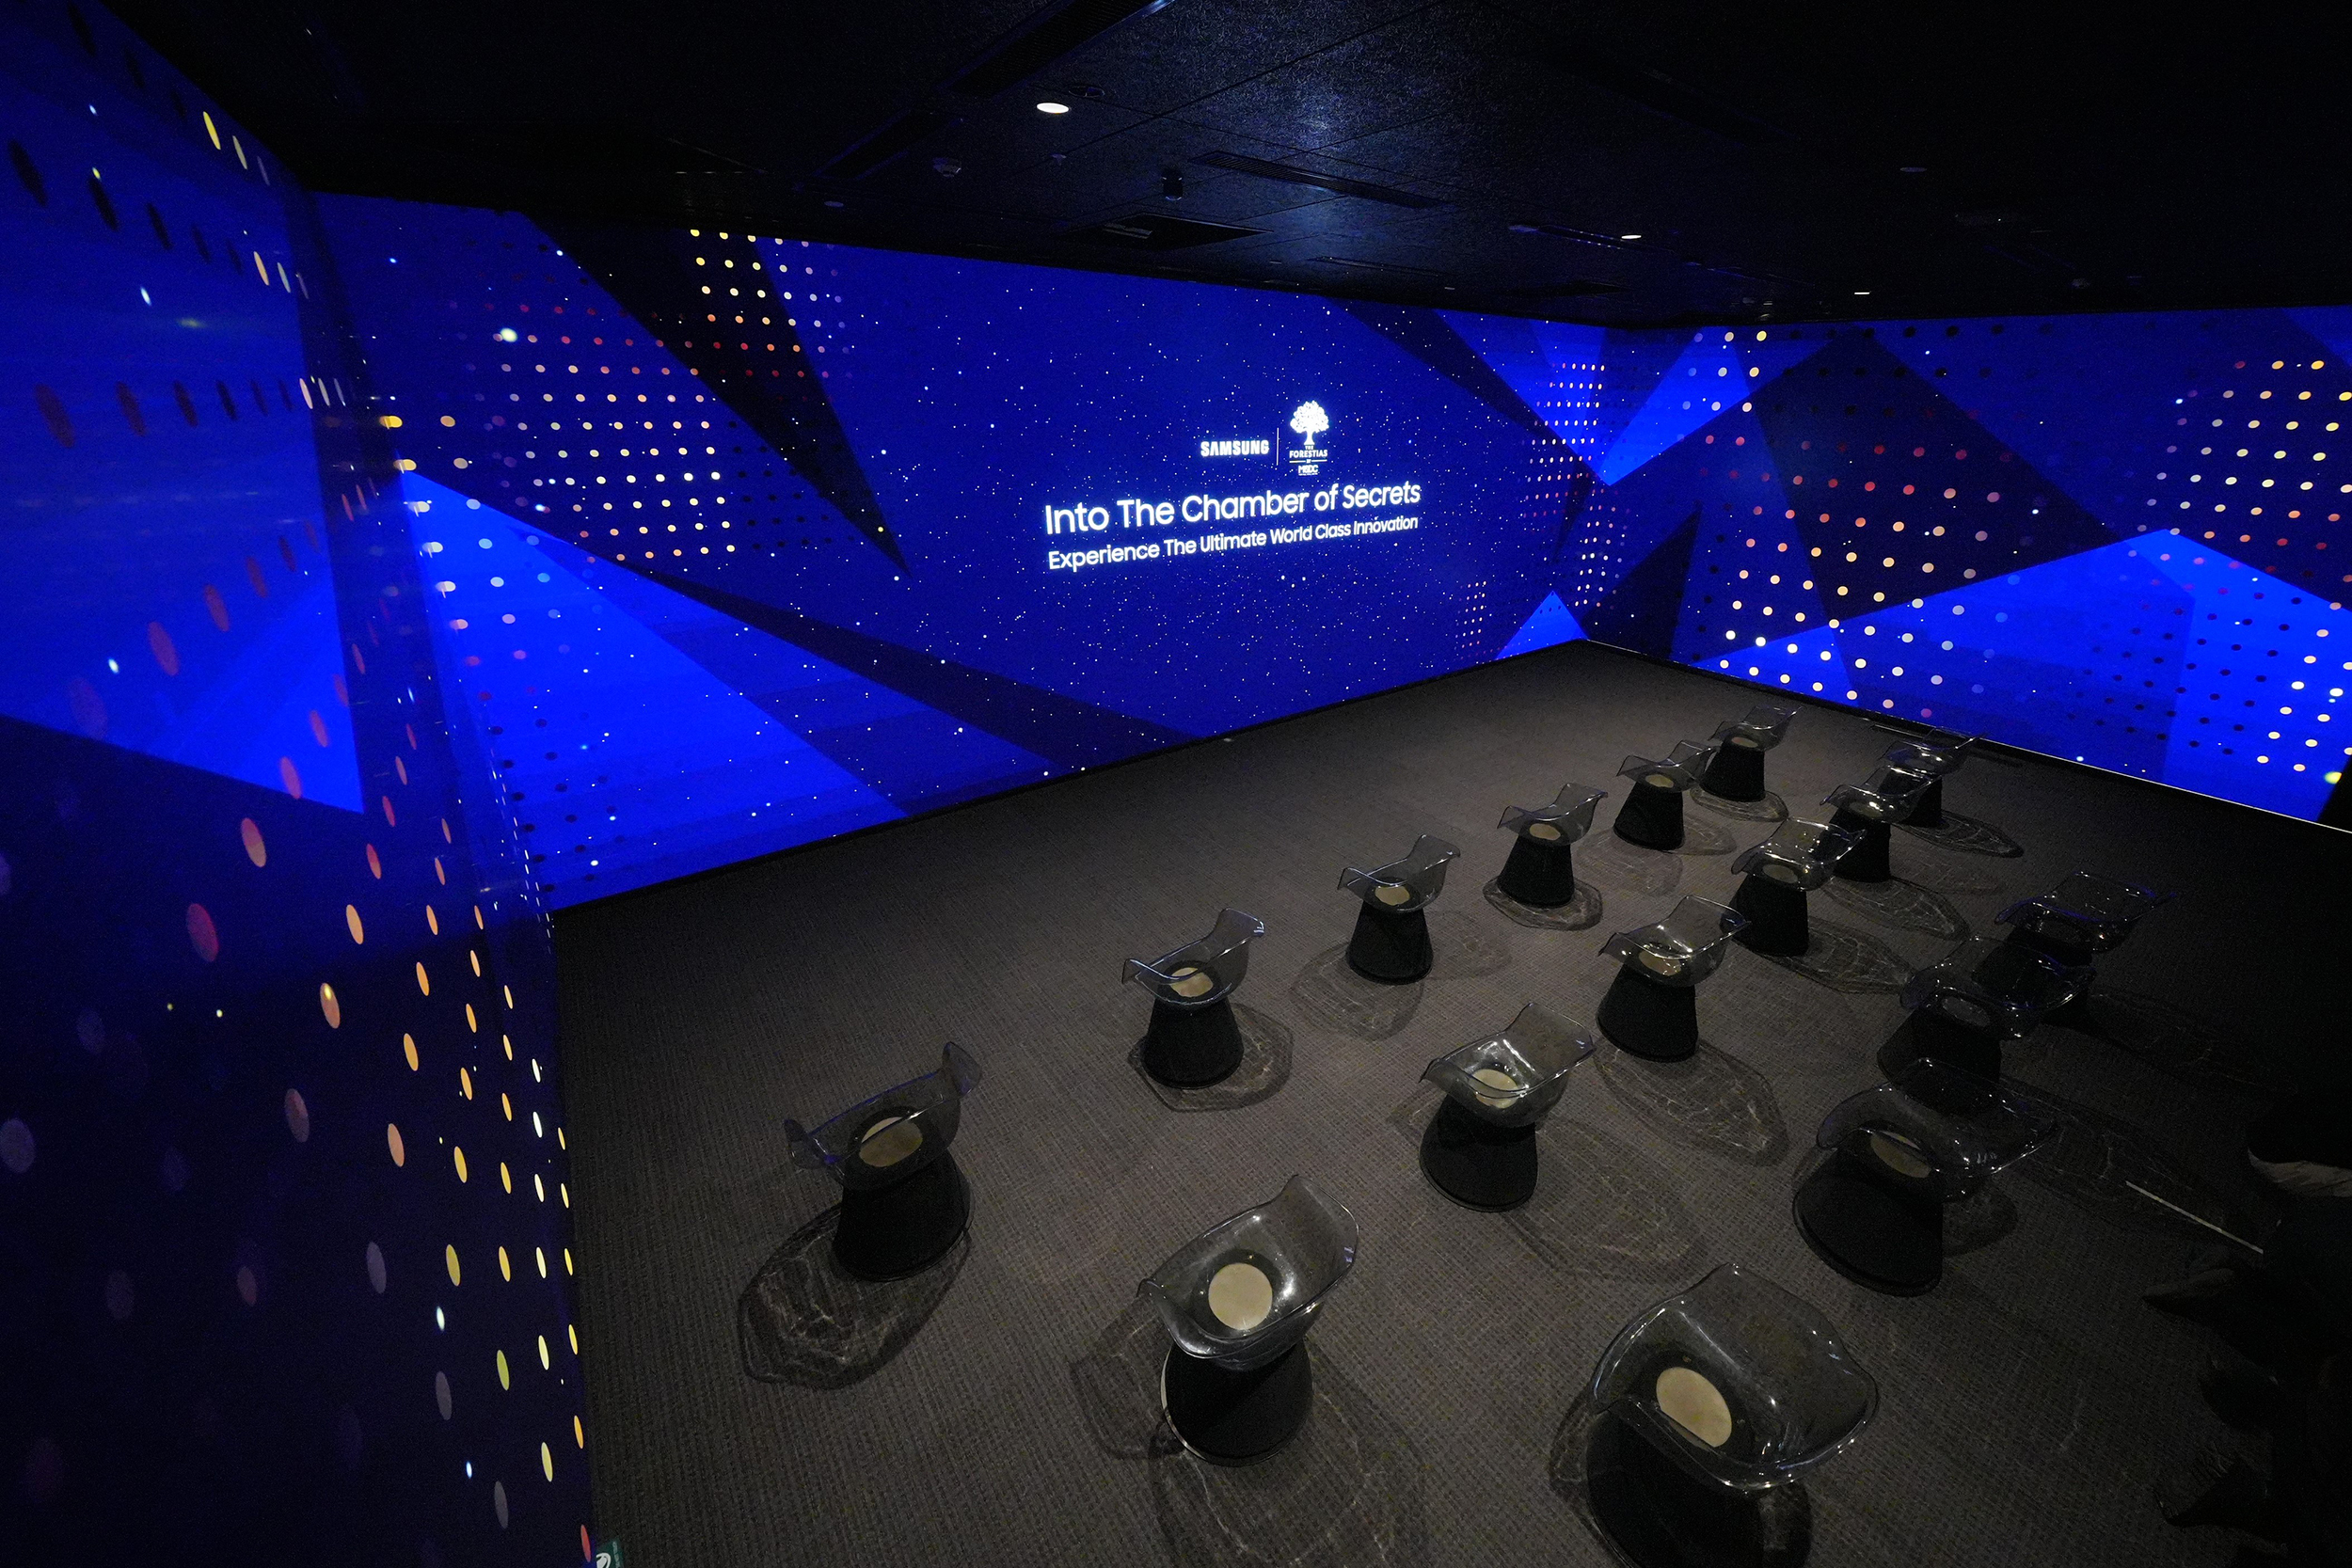 Samsung's The Wall transforms The Forest Pavilion into 360-degree theater that lets audience enjoy one-of-a-kind visual experience